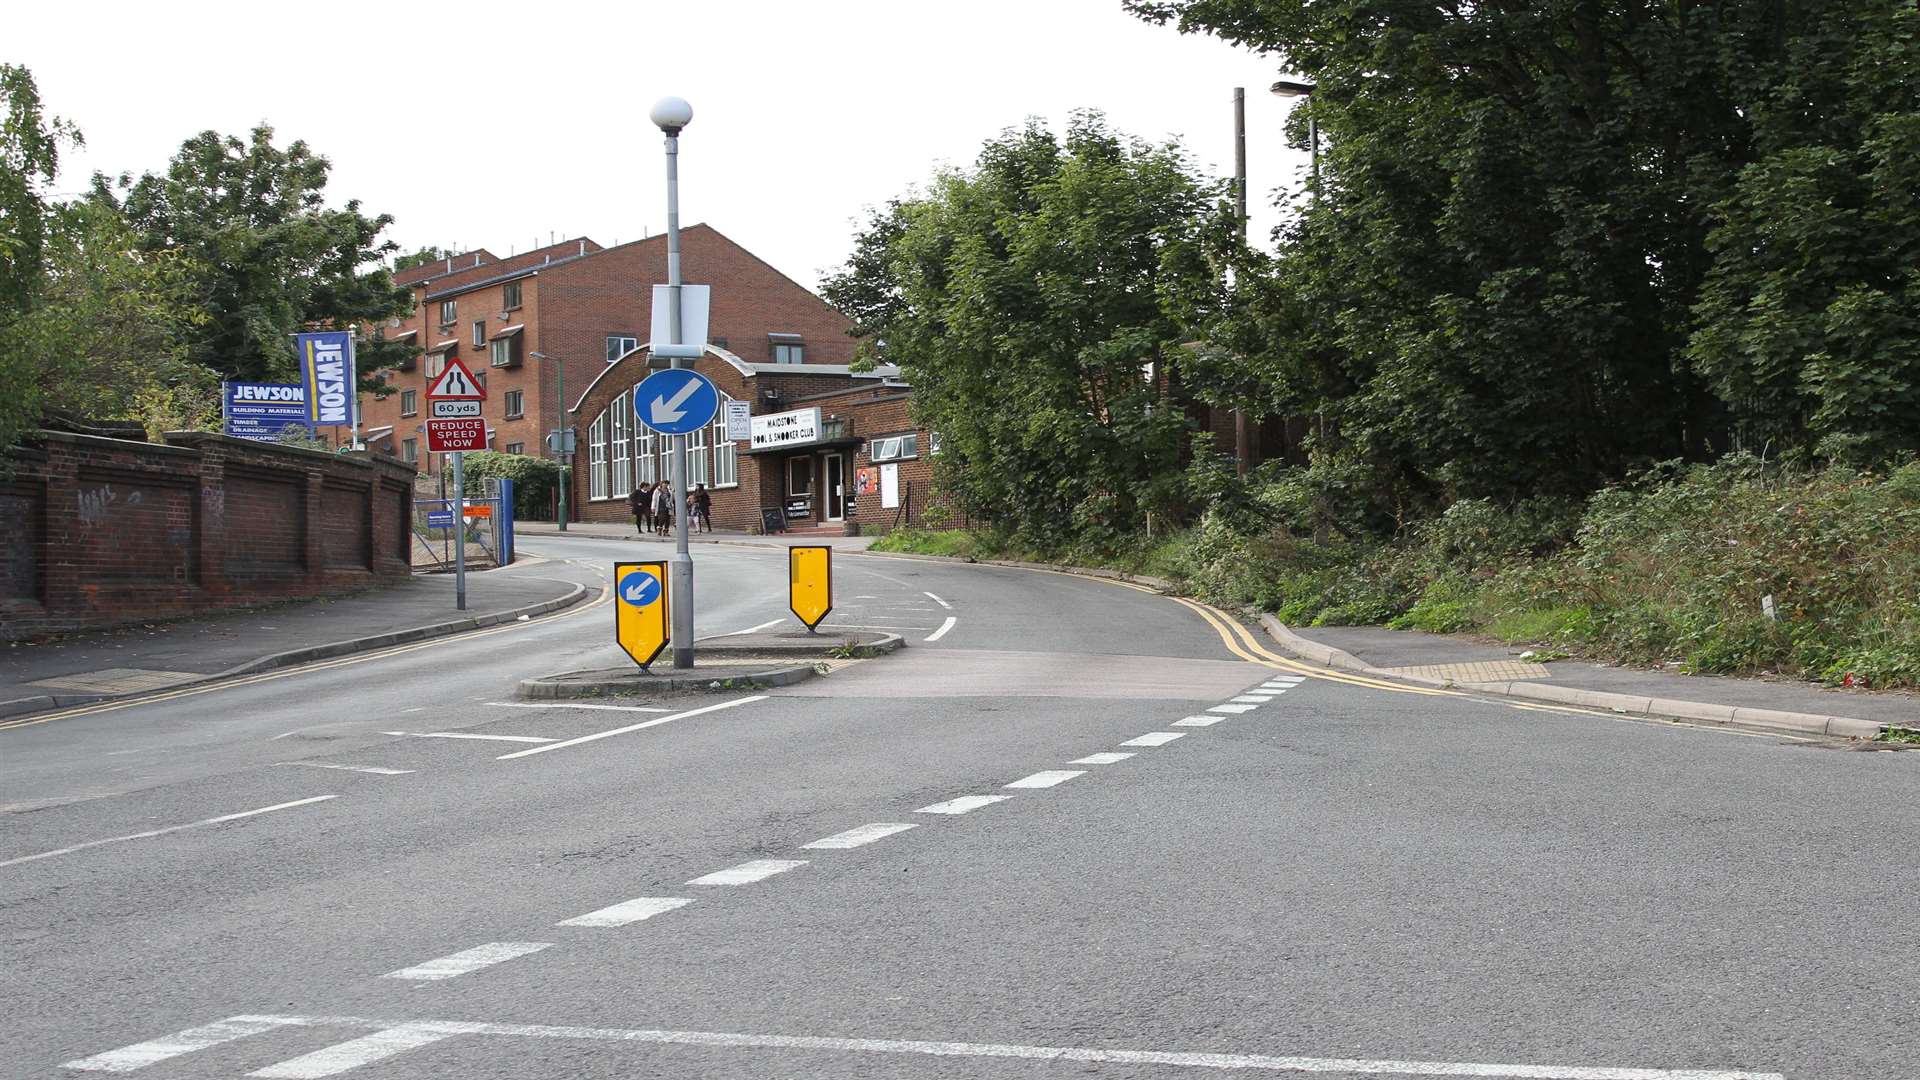 The junction of St Peters Street and Buckland Hill where the flasher was spotted